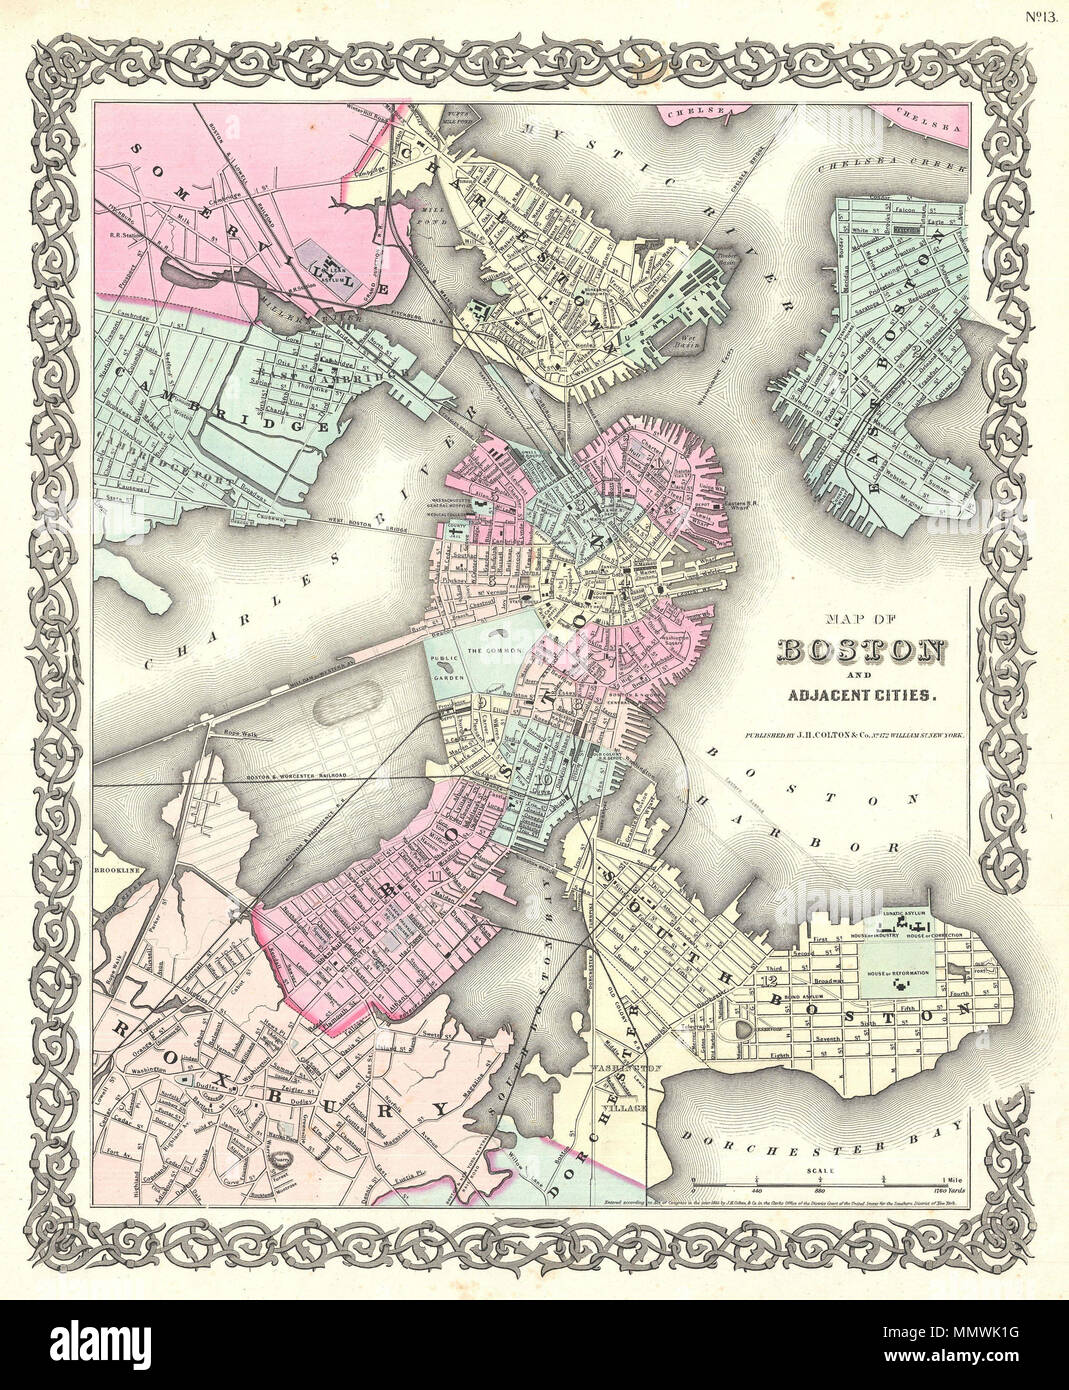 .  English: An excellent 1855 first edition example of Colton's rare map of Boston, Massachusetts. Includes the surrounding communities of Cambridge, Summerville, Charleston, East Boston, South Boston and Roxbury. Hand colored in pink, green, yellow and blue pastels with considerable detail at level of individual streets and buildings. Surrounded by Colton's typical spiral motif border. This is an exceptionally interesting and important map of Boston issued just prior to the Back Bay land reclamation projection. The street and avenue grid is ghosted-in in anticipation of this enormous urban de Stock Photo